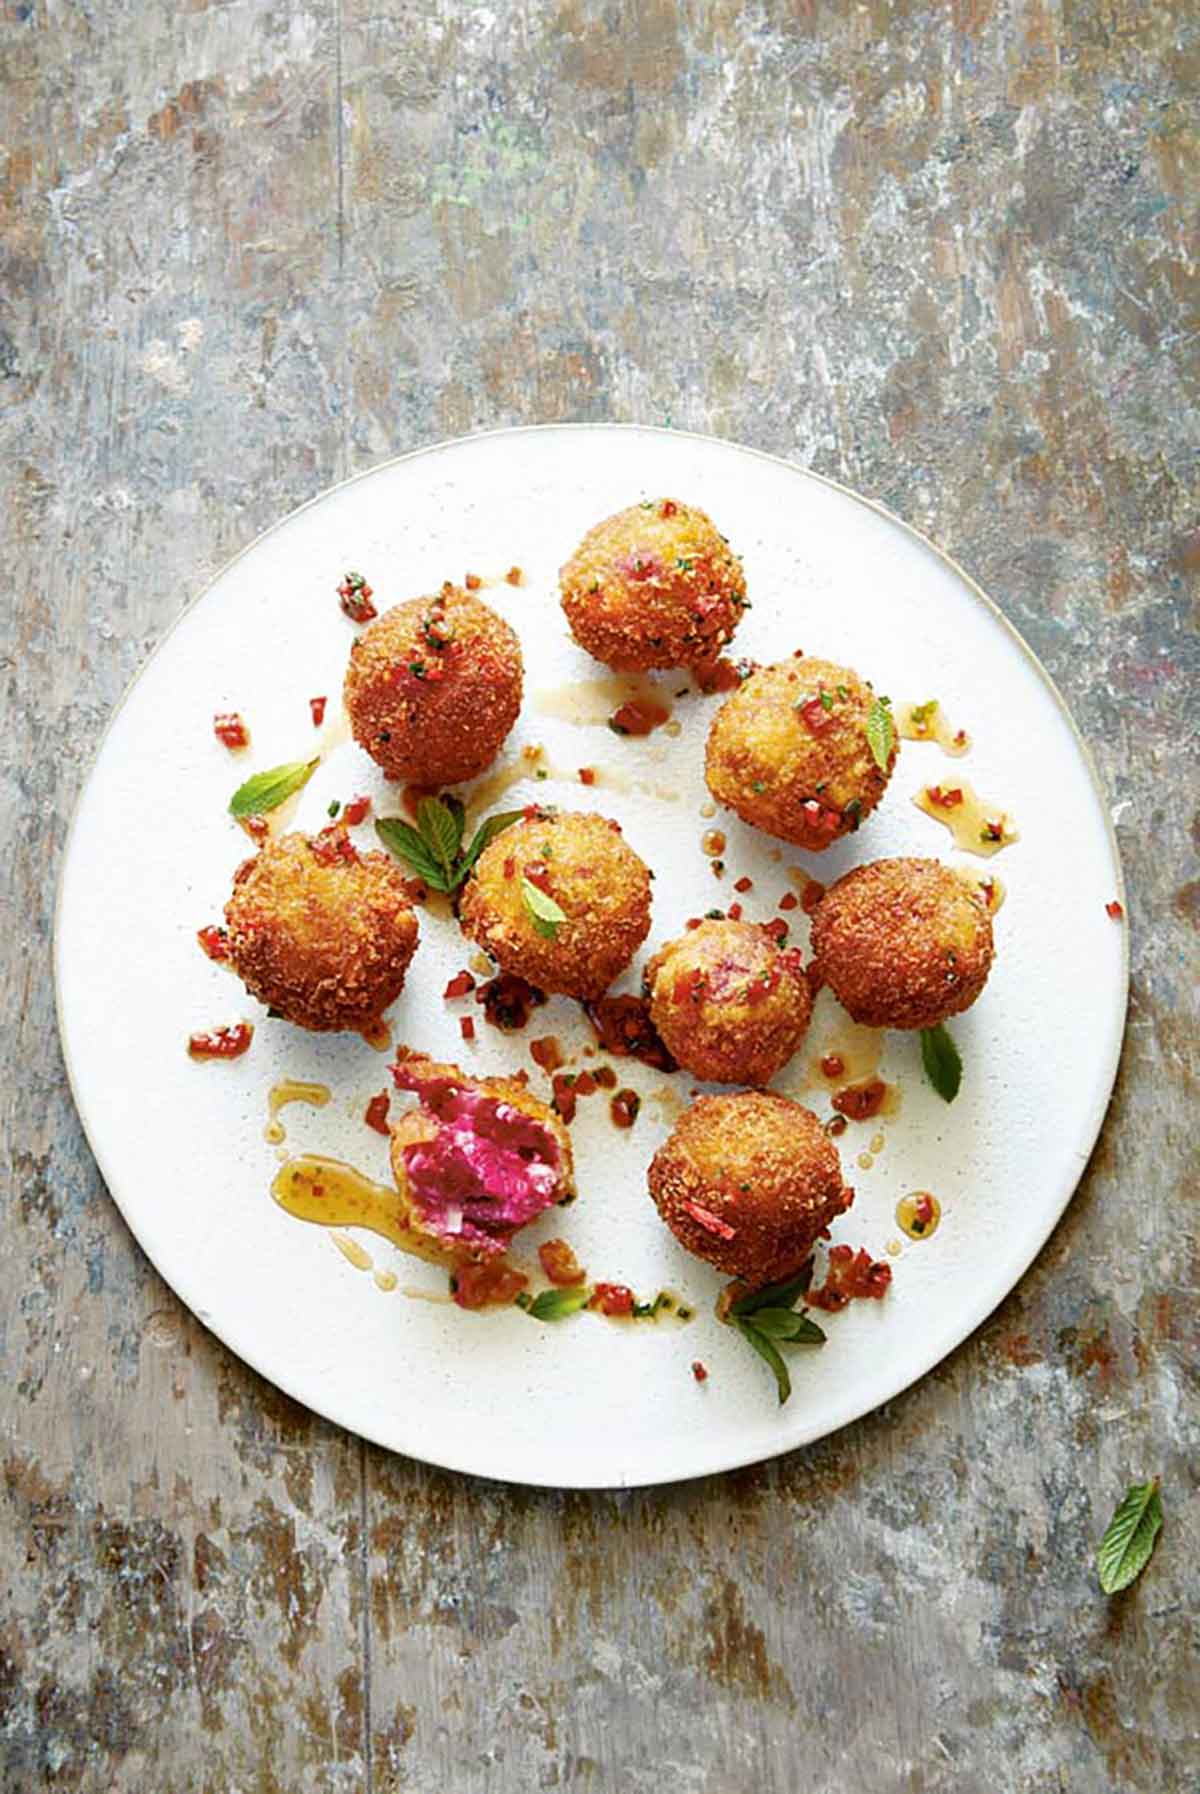 9 goat cheese croquettes on a plate.